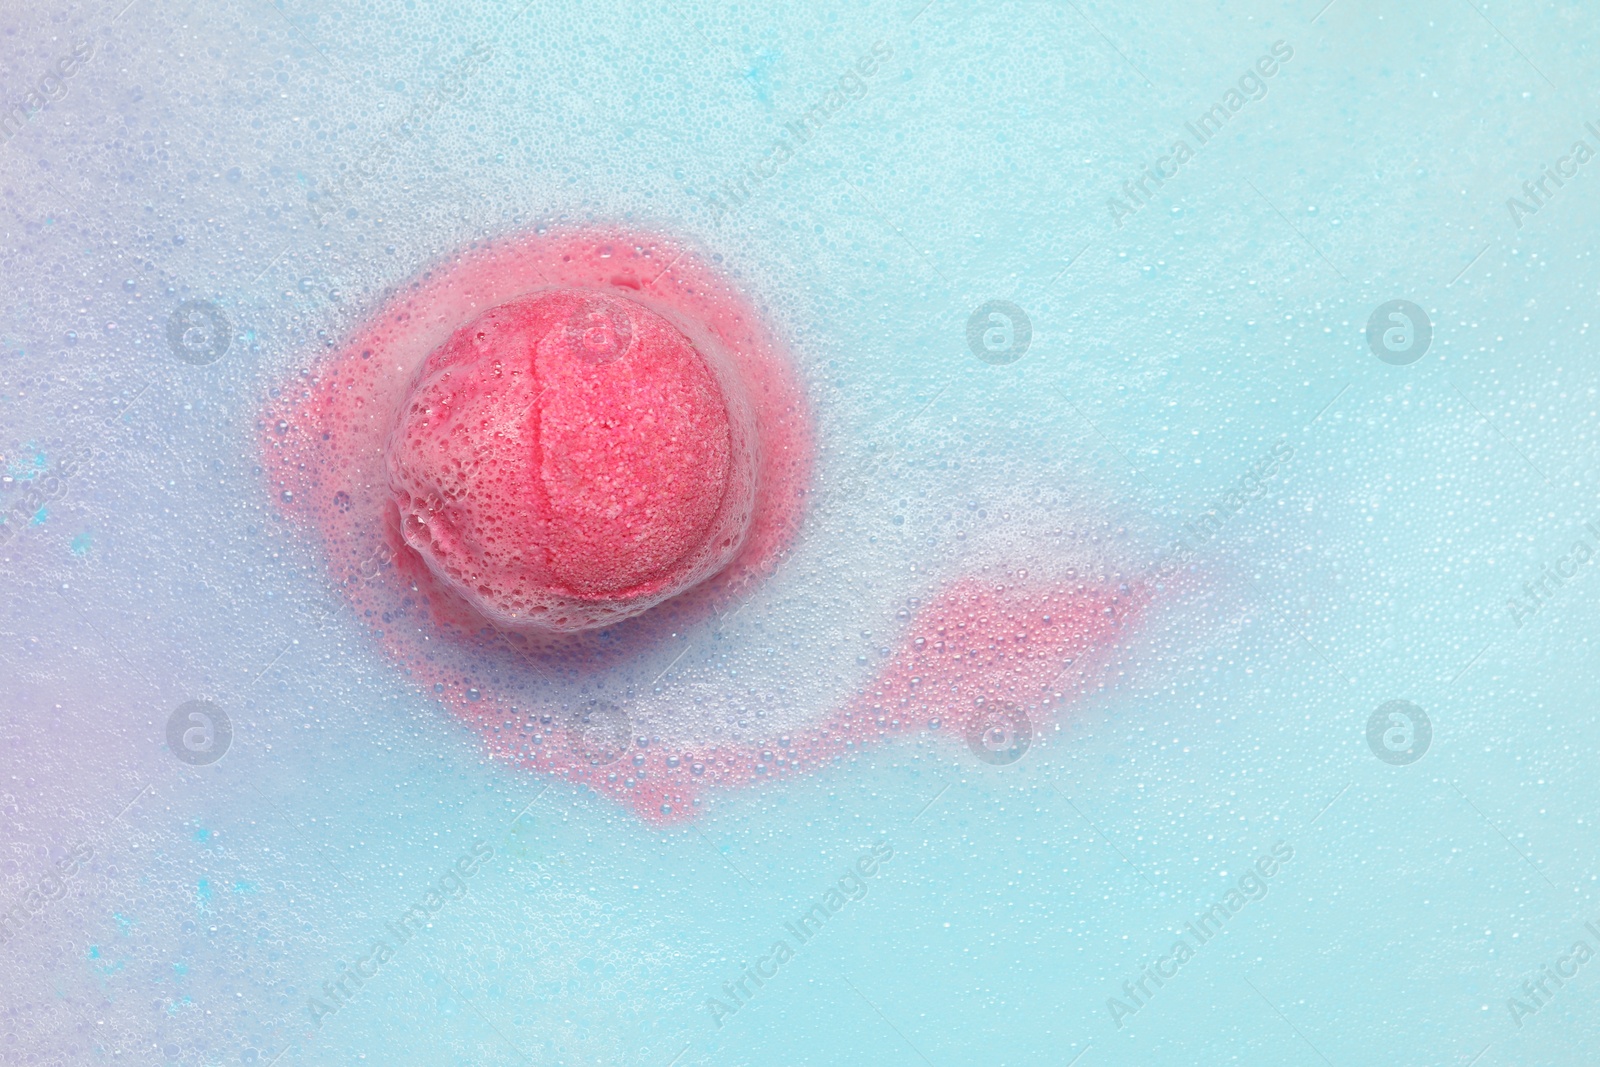 Photo of Pink bath bomb dissolving in water. Space for text